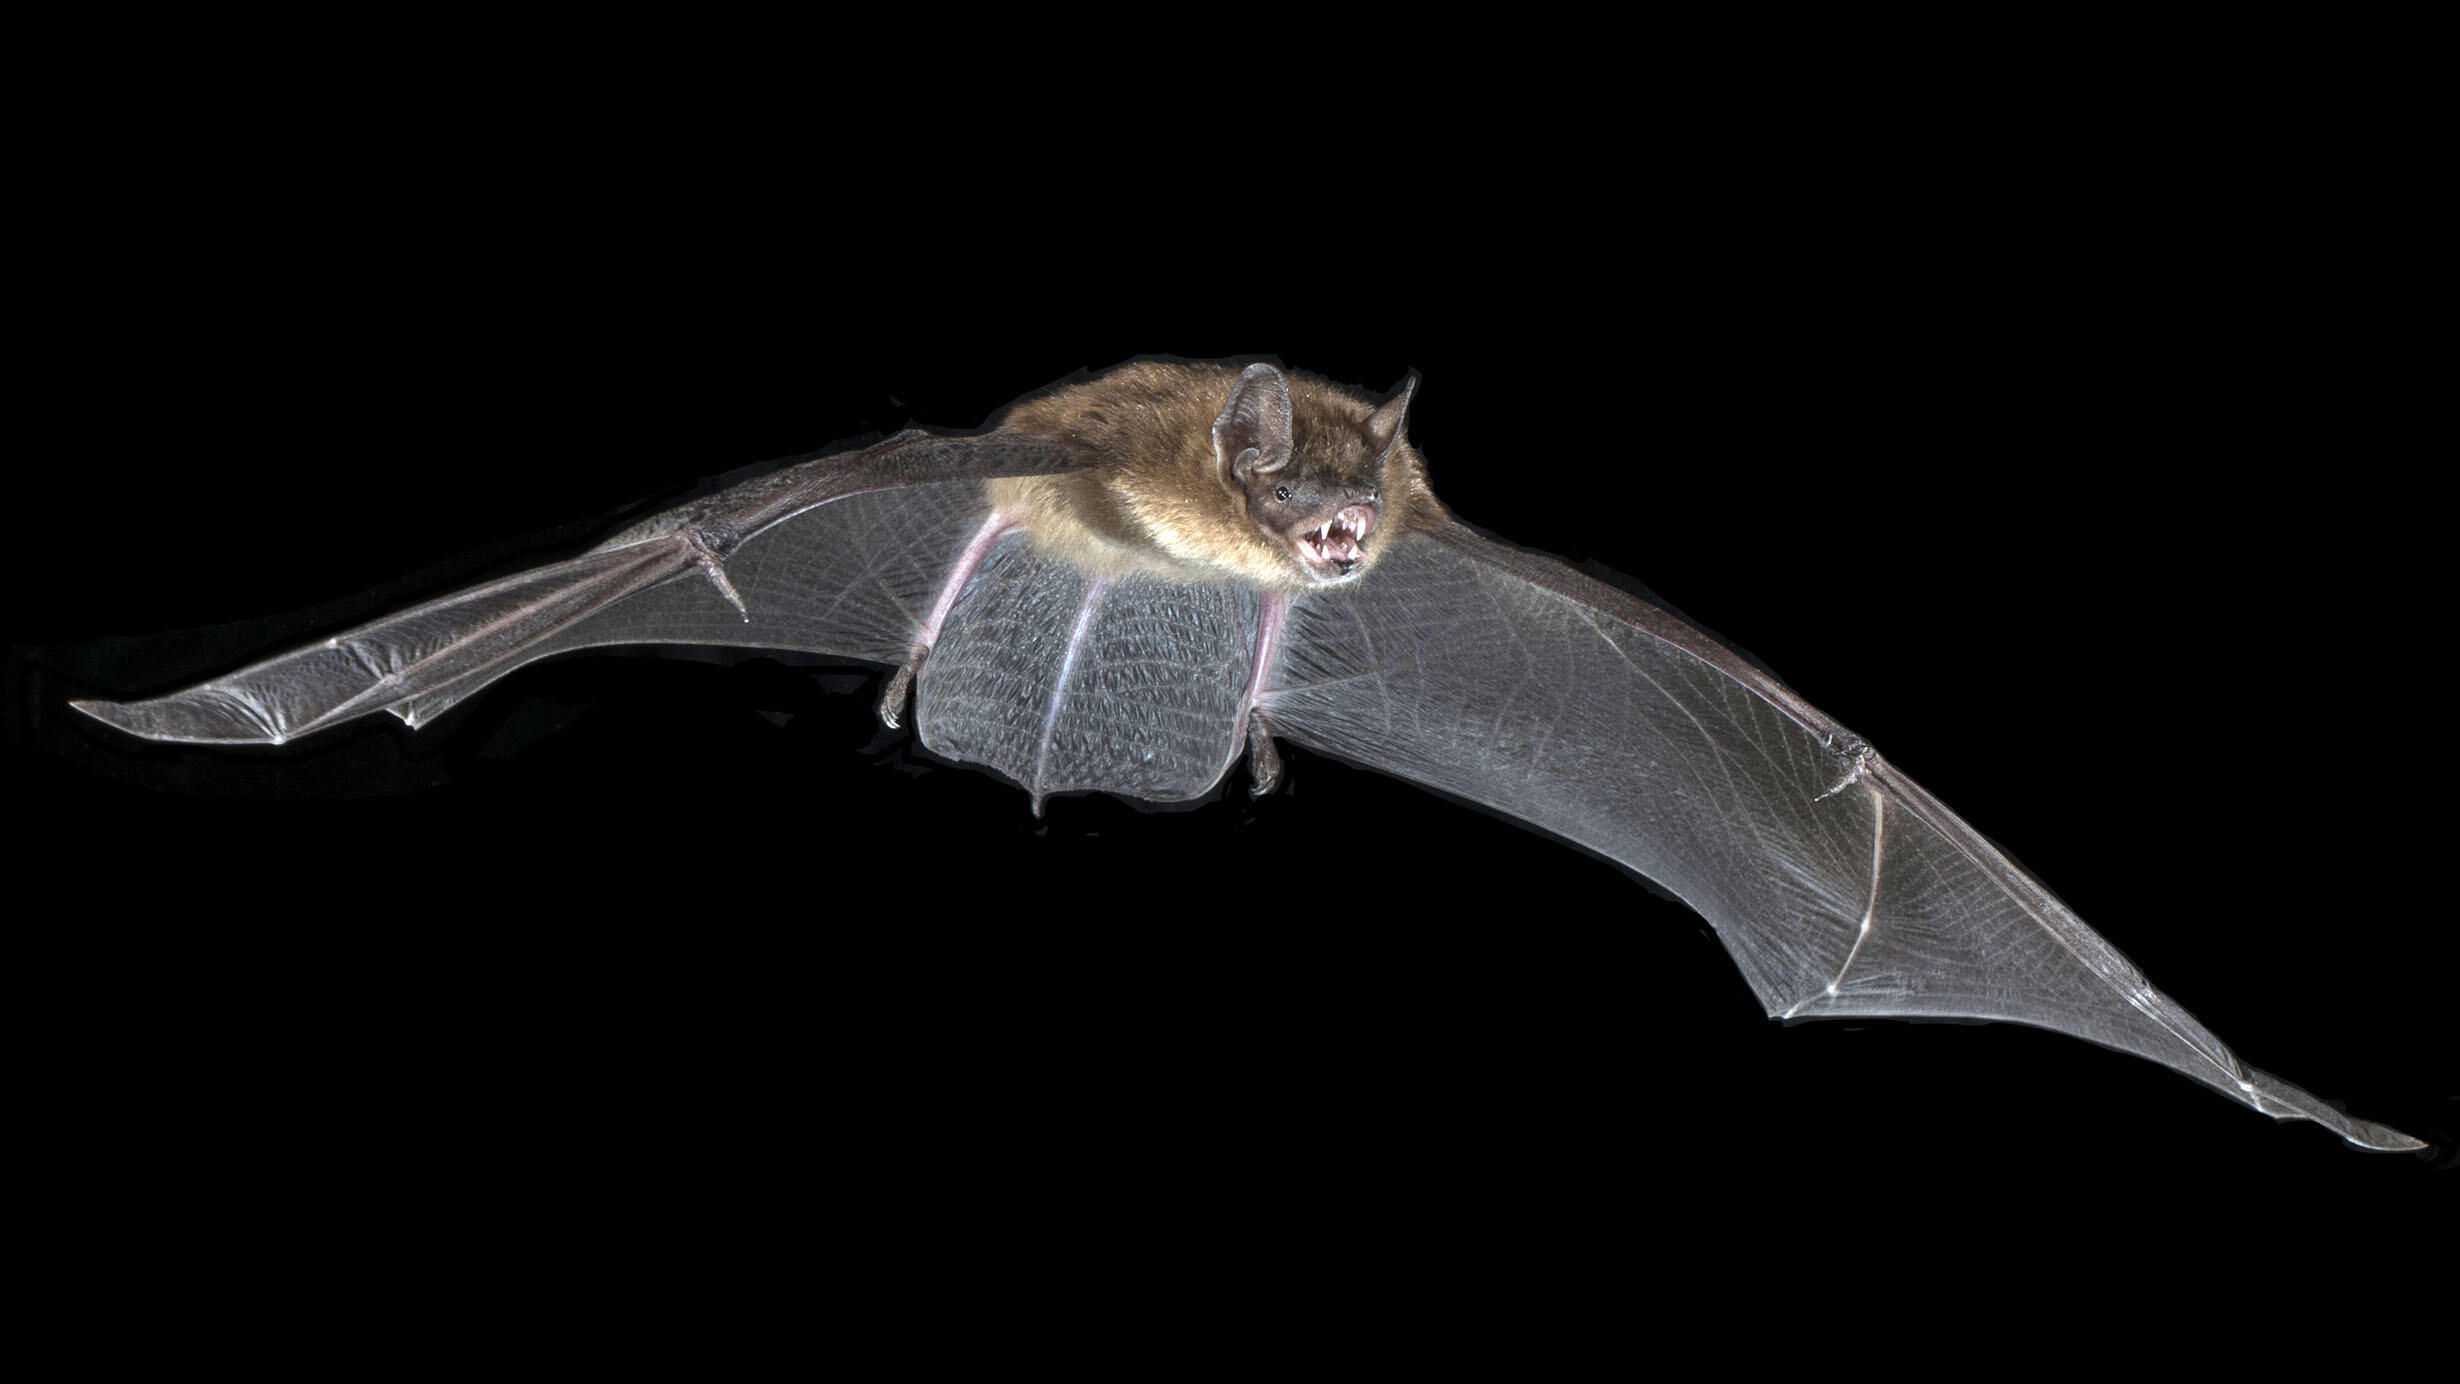 A bat with wings spread swoops through the air.